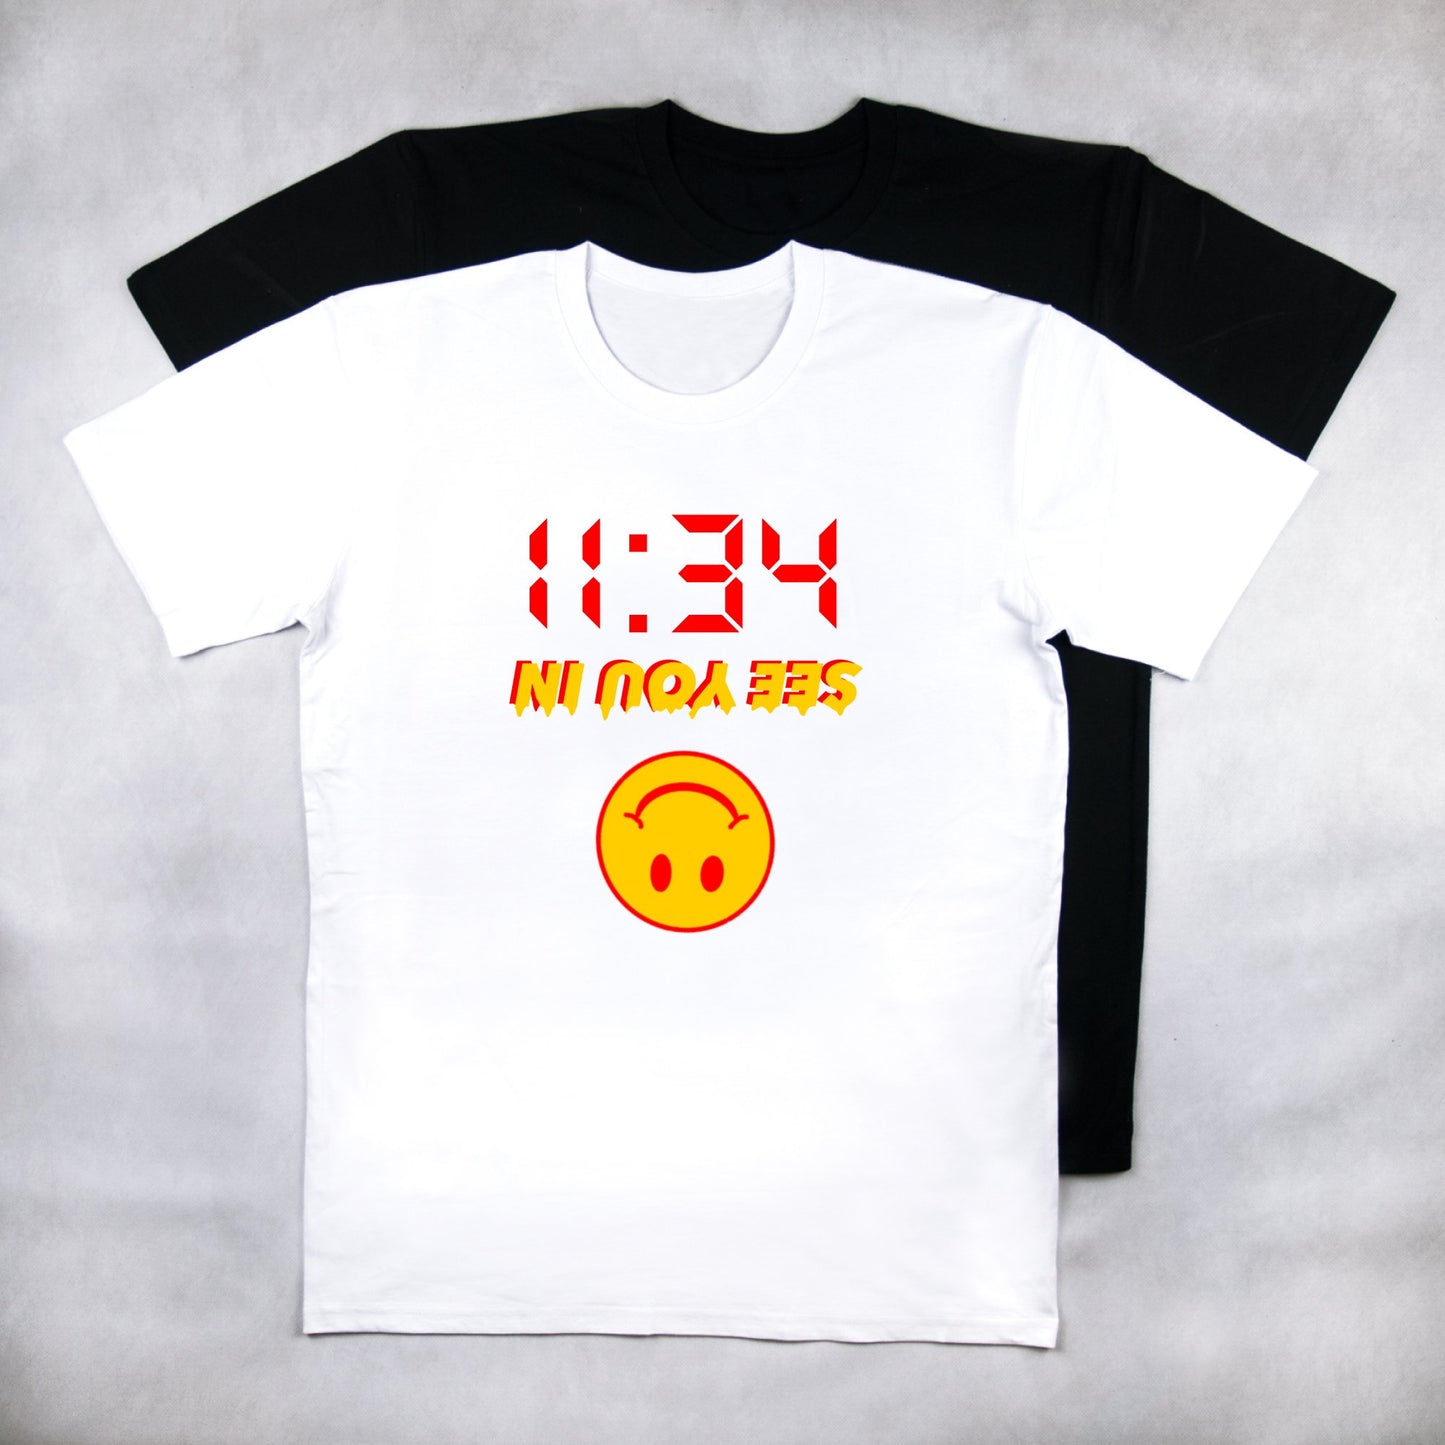 See You In 11:34 Tee